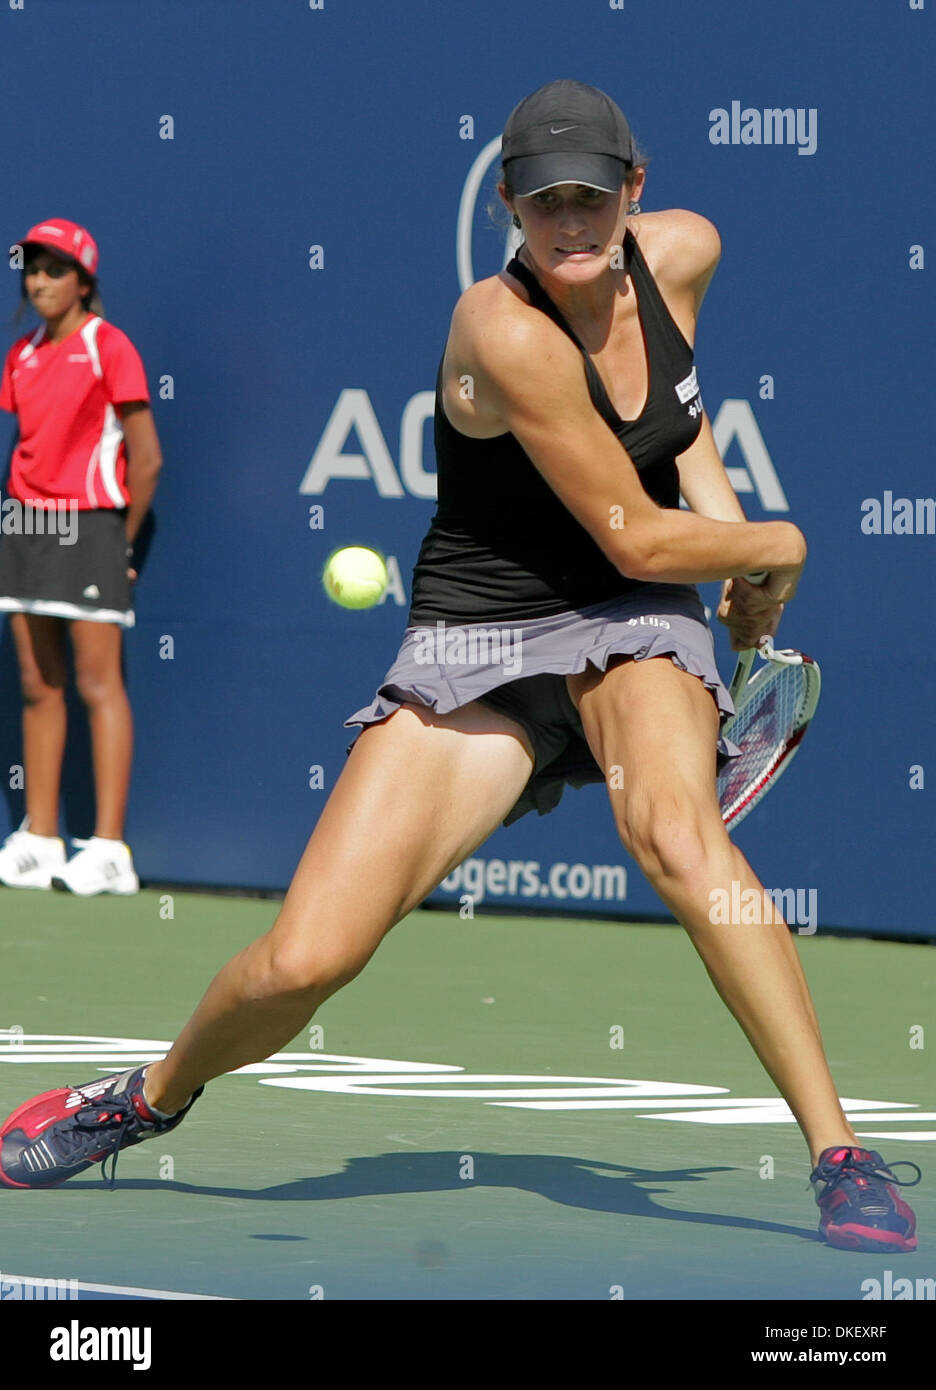 15 August 2009 Canadian Rebecca Marino In Action Against Germany S Kristina Barrois And Lost In 3 Sets 1 6 7 5 And 4 6 On Opening Day Qualifying At The Women S Rogers Cup Tennis Played